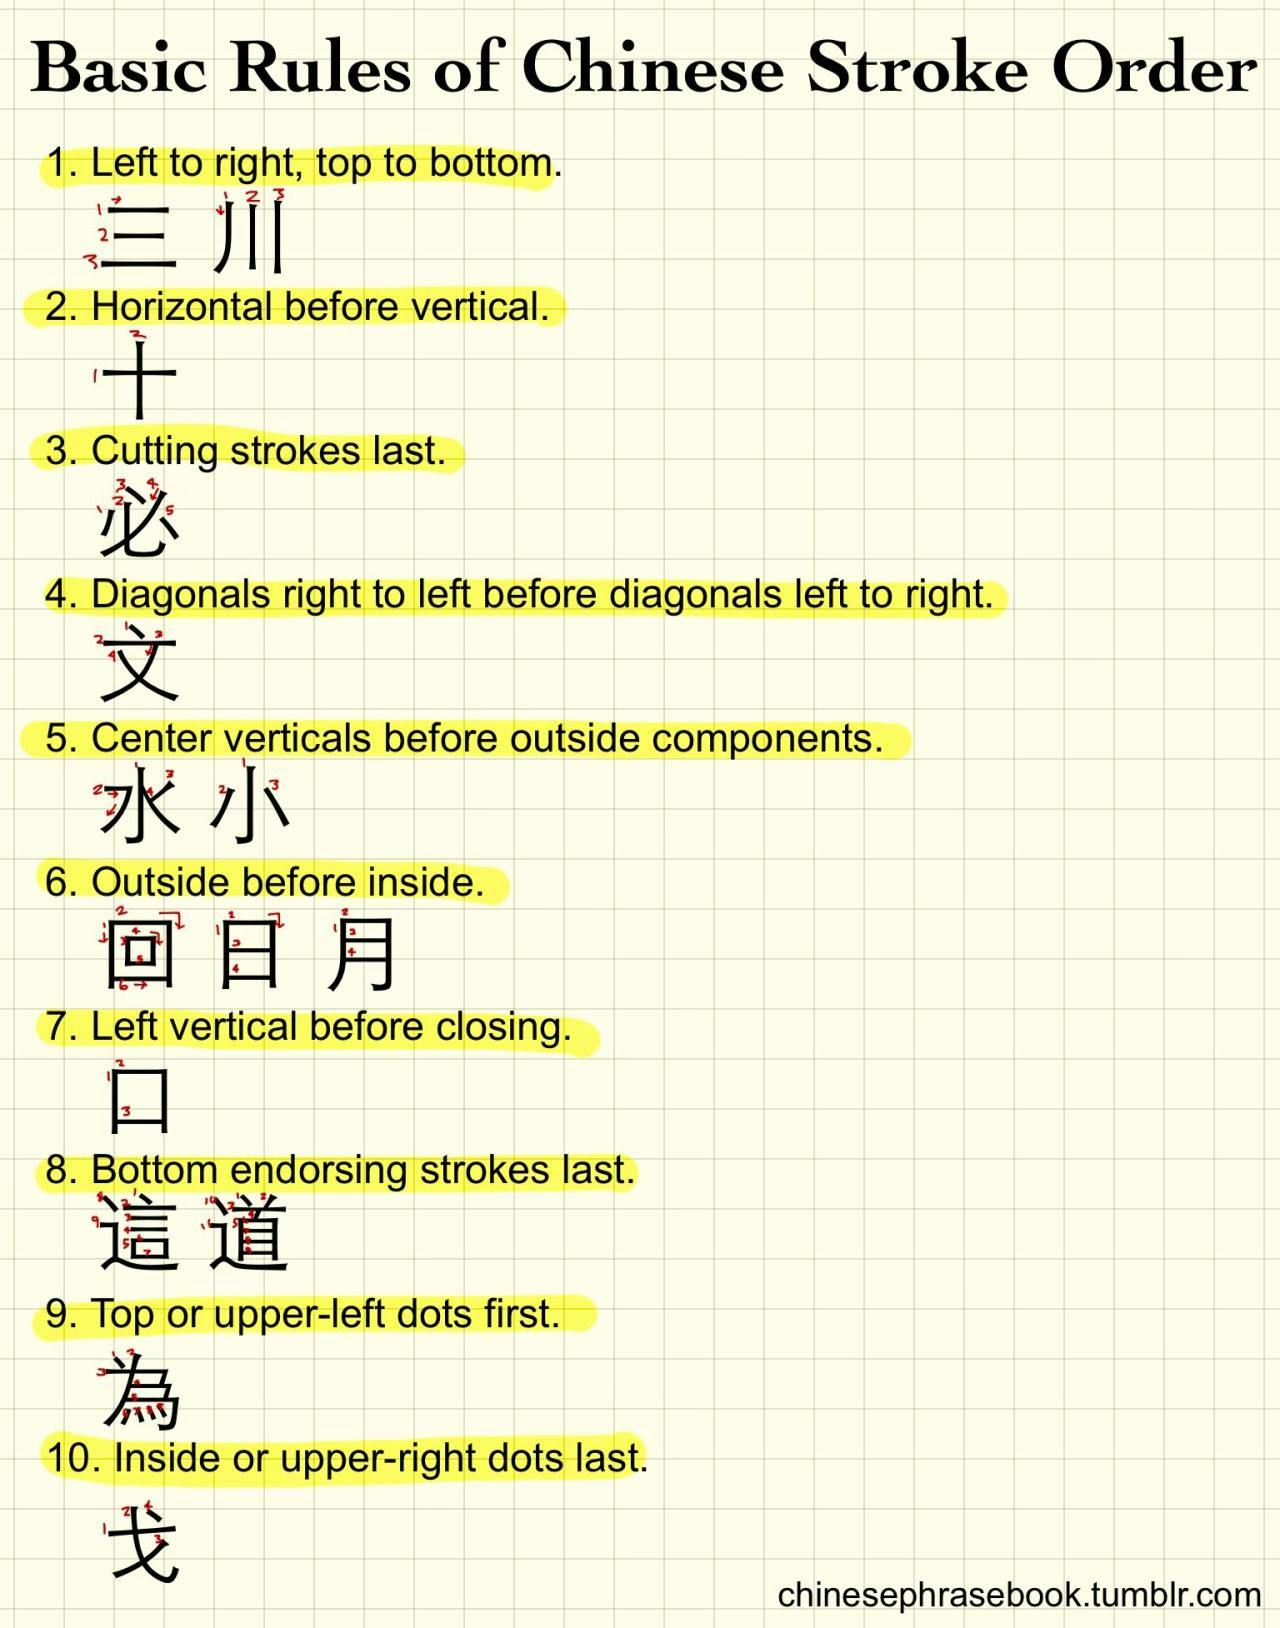 chinese stroke order rules - mistakes when learning chinese